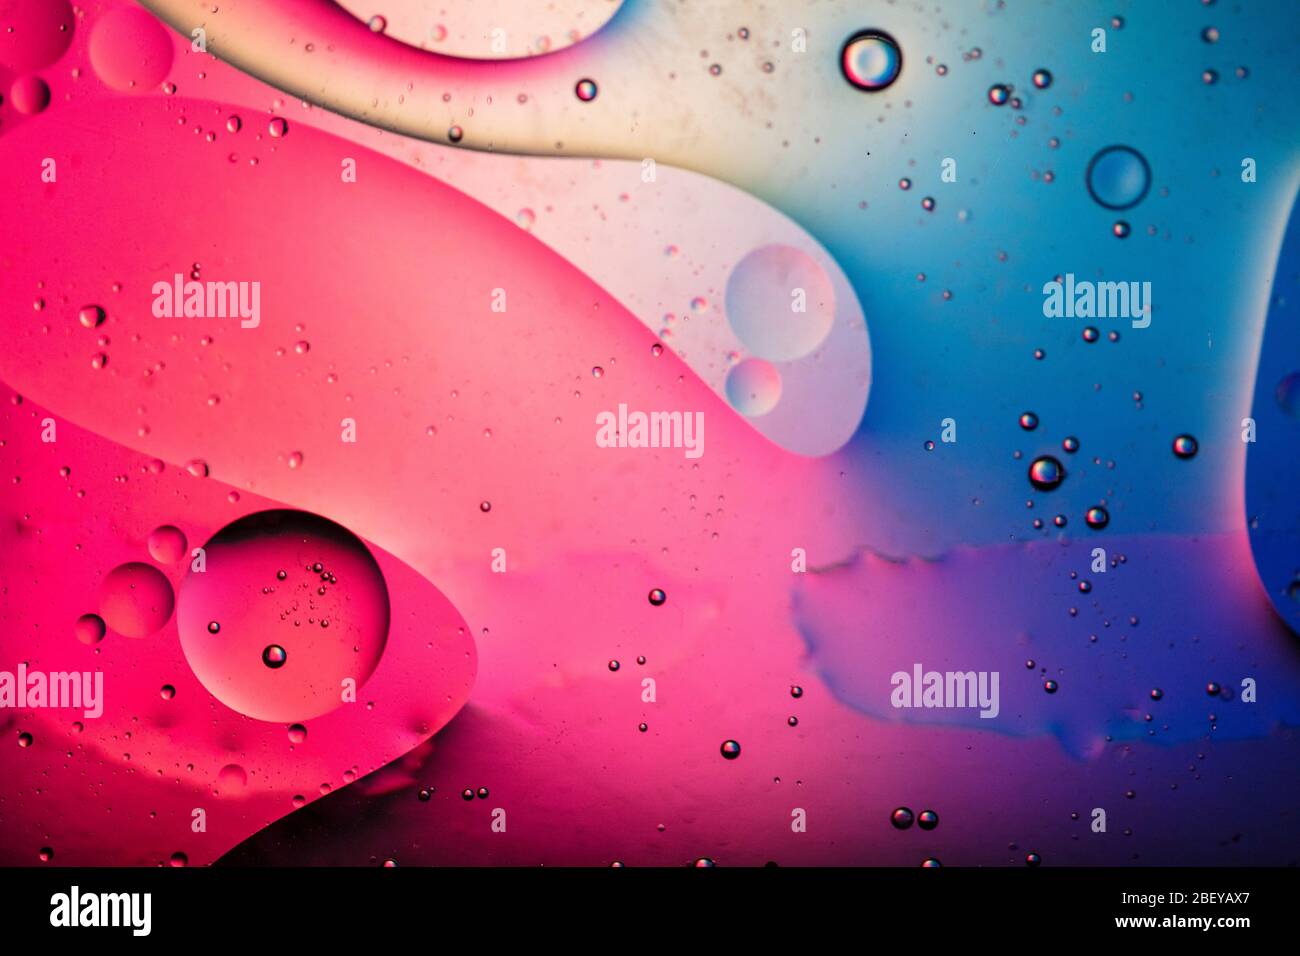 Abstract colourful creative macro oil and water background with bubbles. Stock Photo